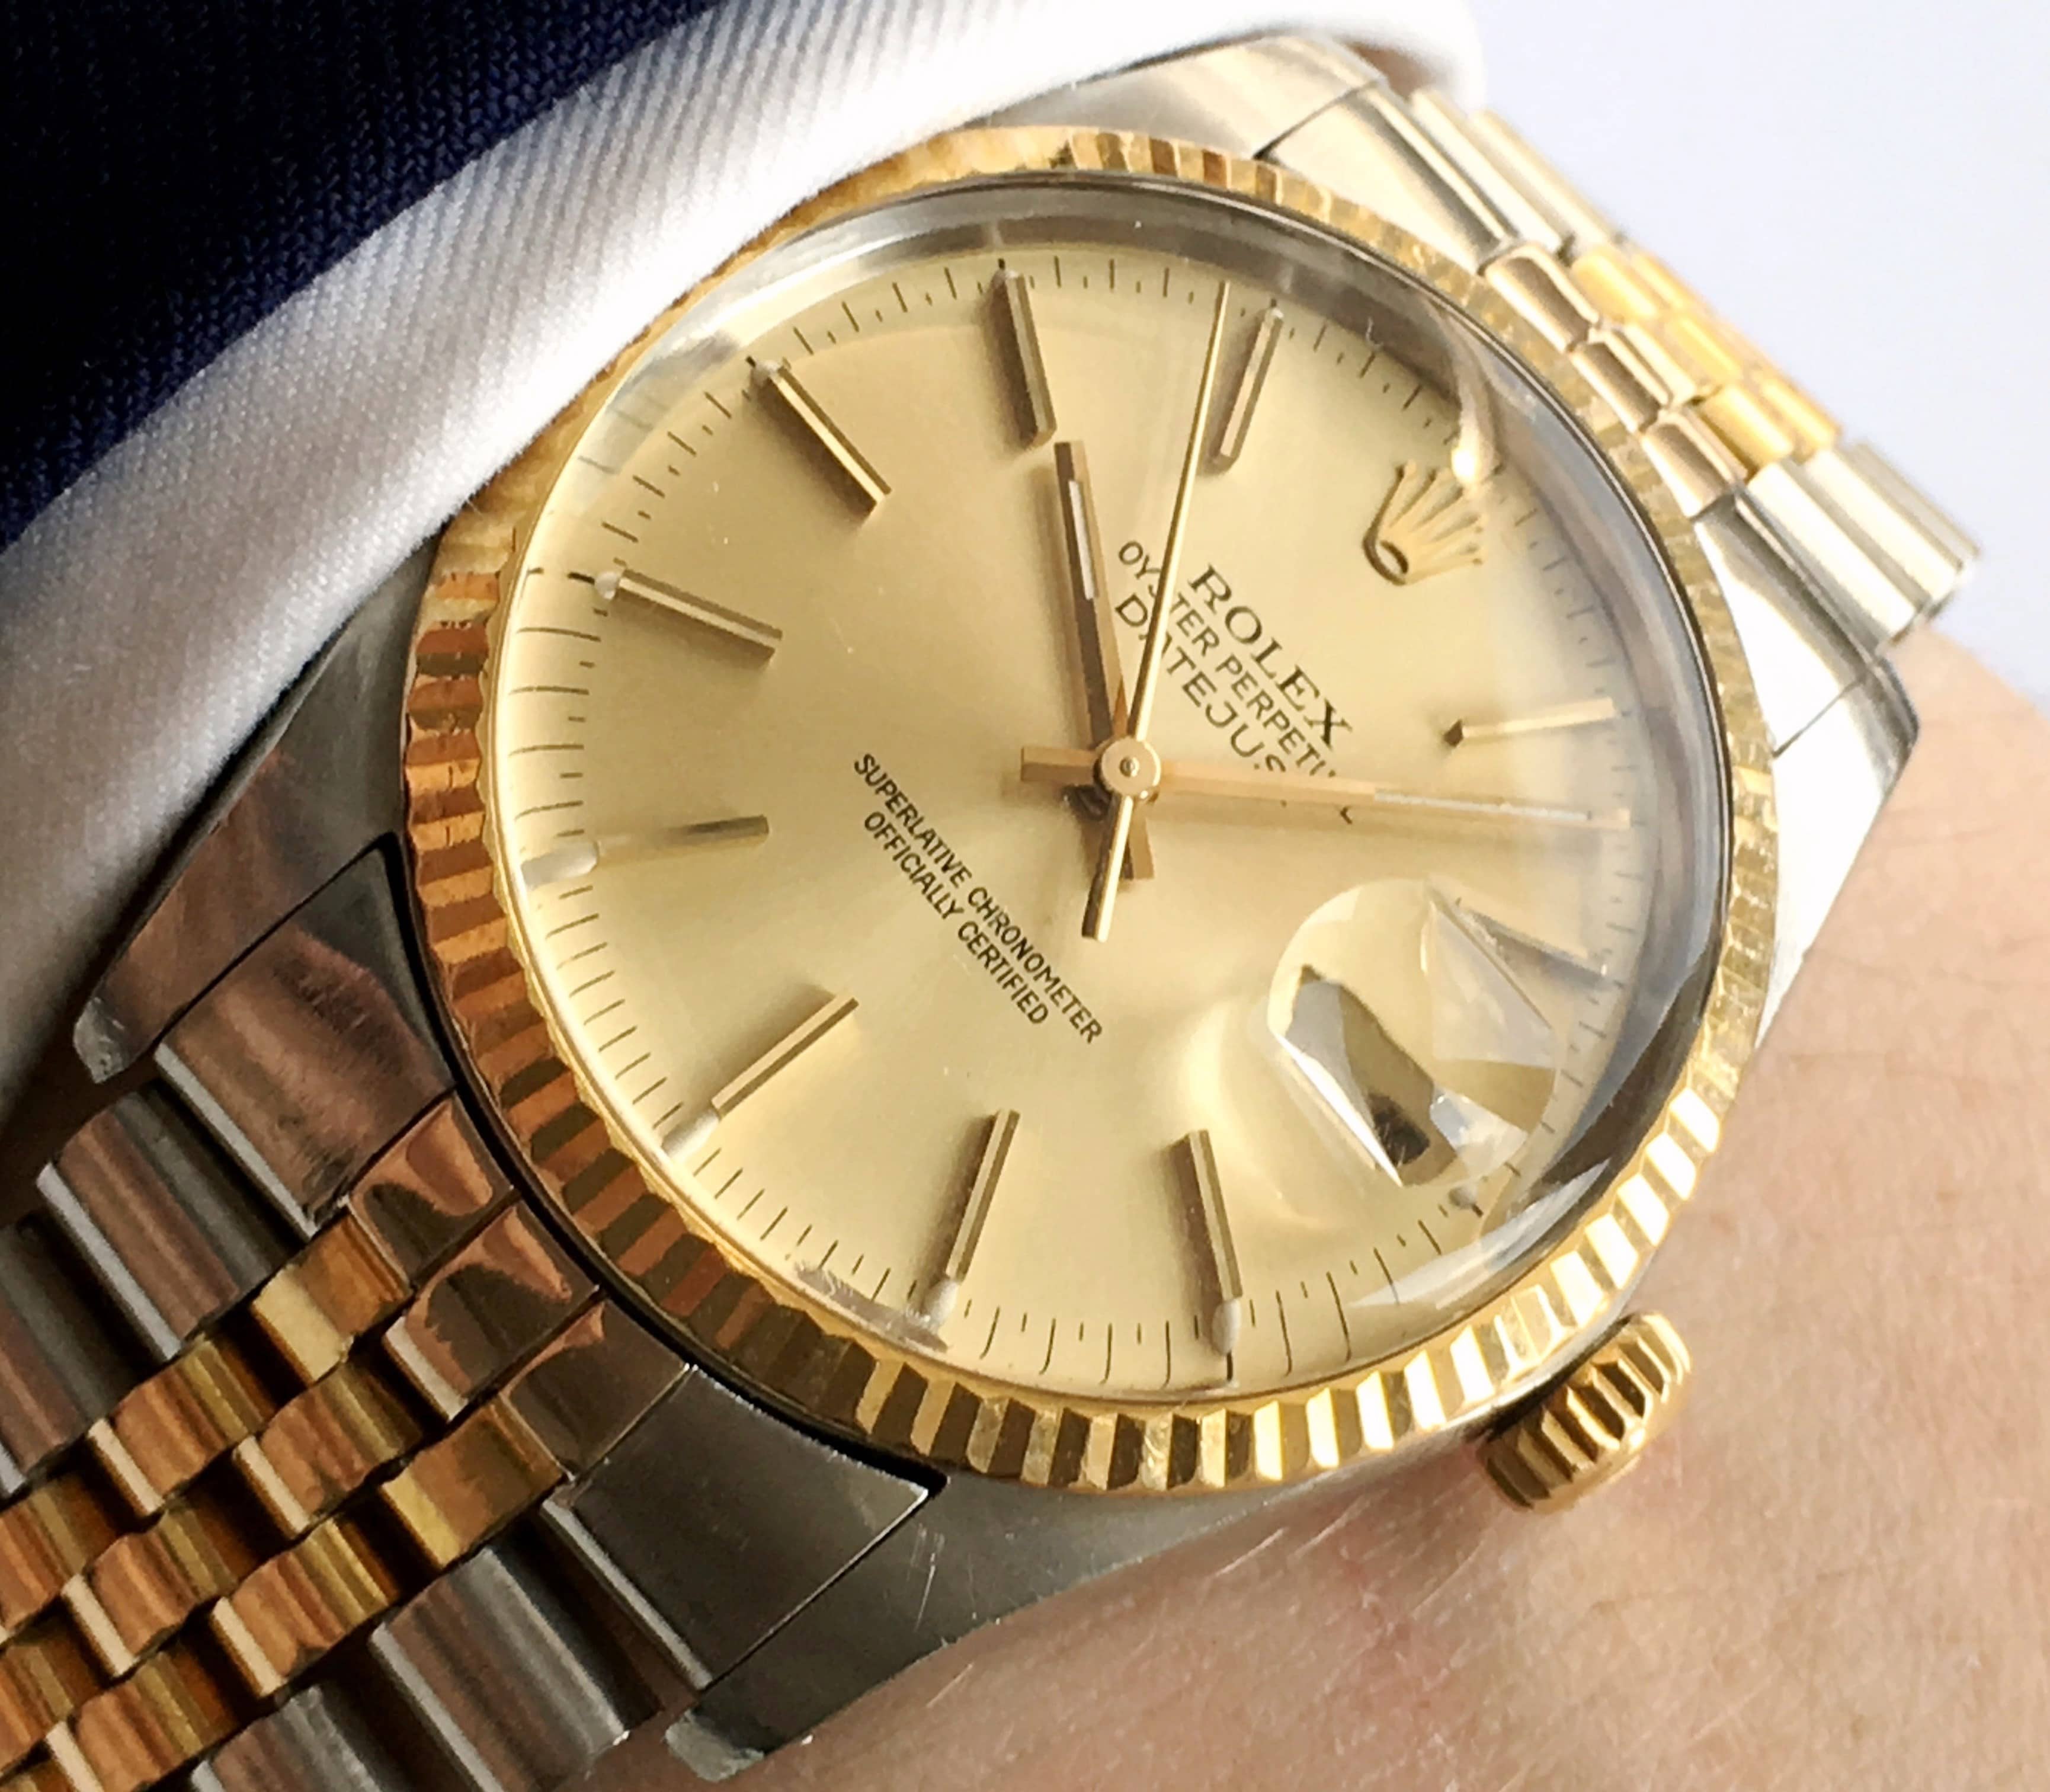 Beautiful Twotone Rolex Datejust with 